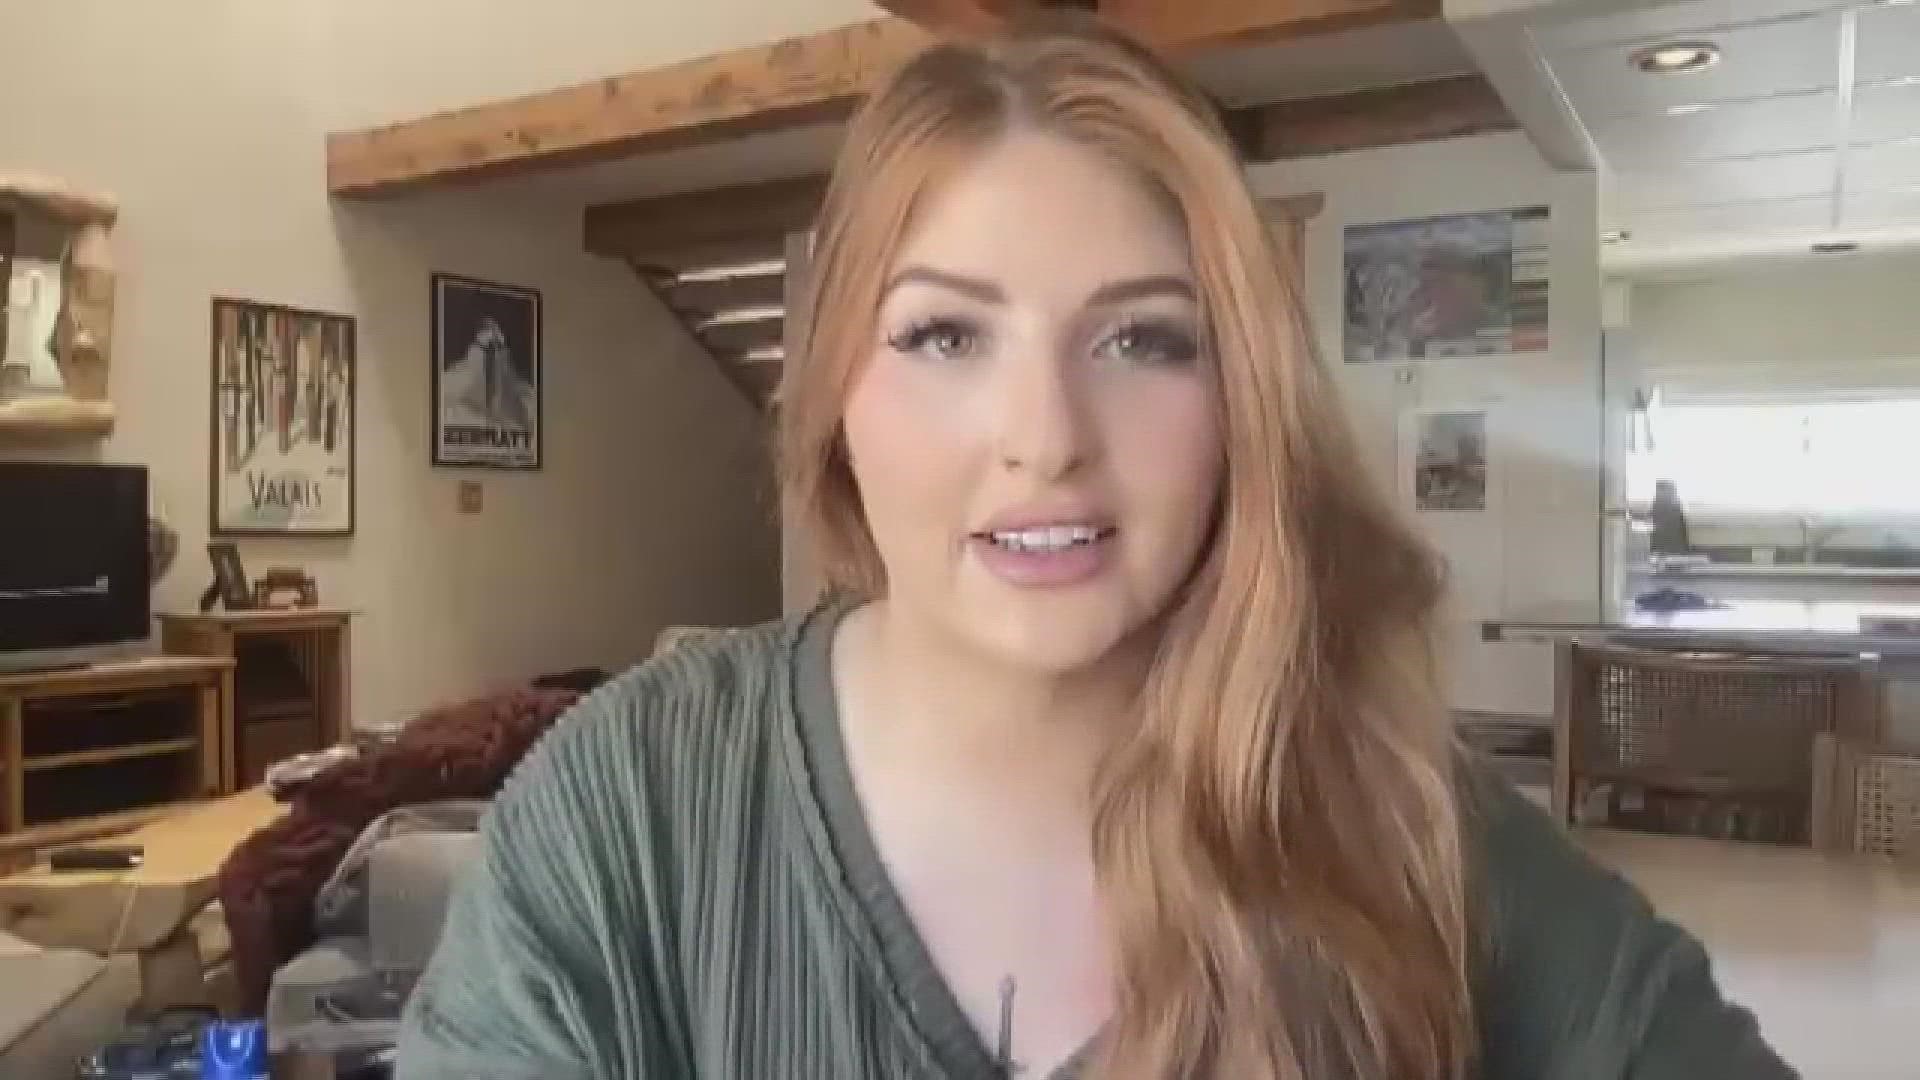 Alexis Hinkley grew up in western Washington and now works as a traveling nurse. A TikTok about her experiences in healthcare gained nearly 11 million views.